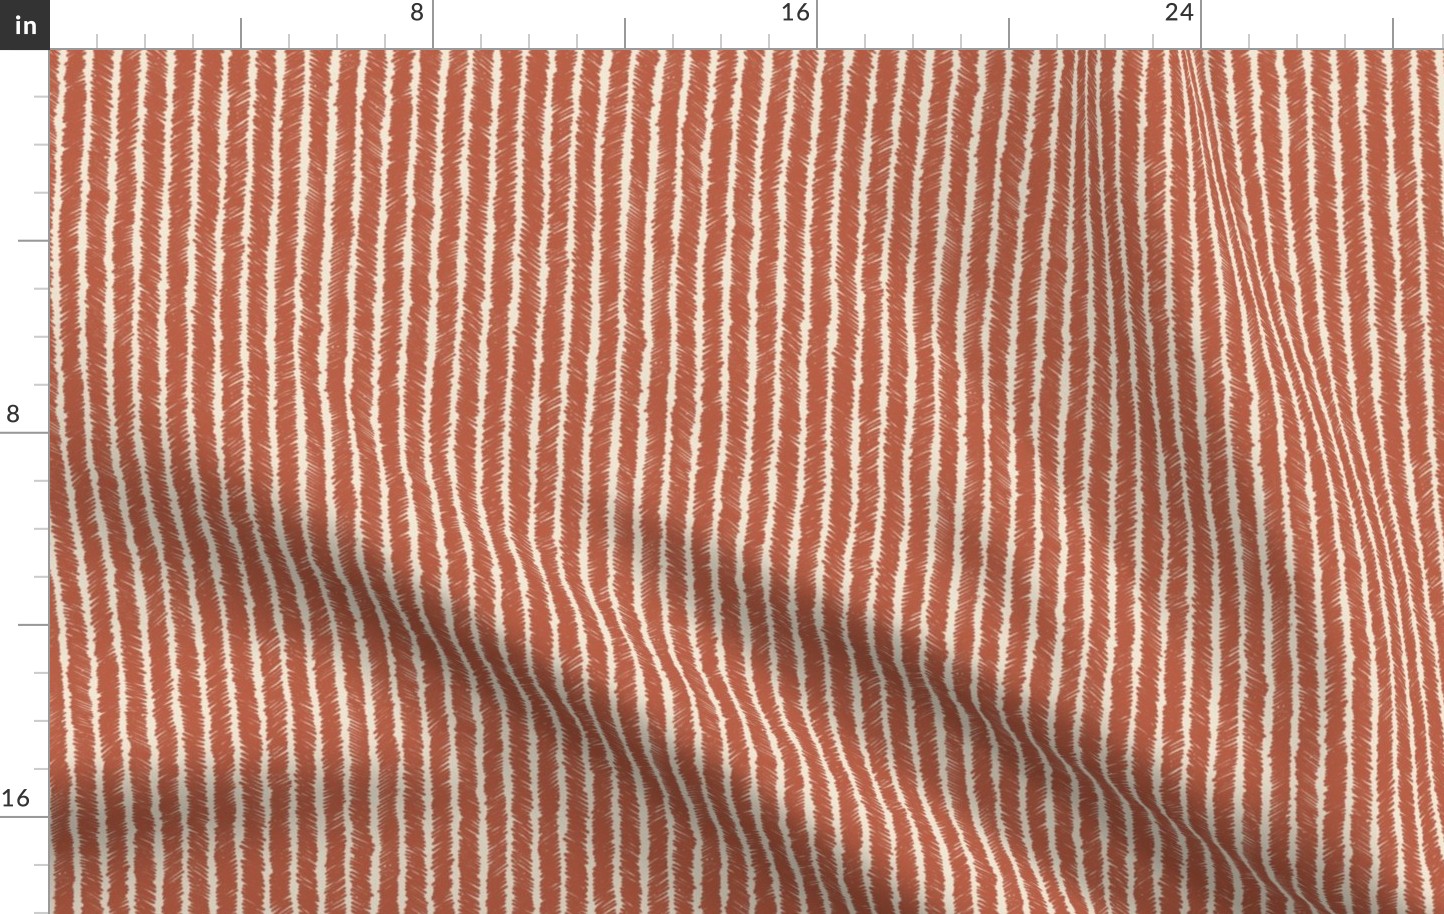 Hand drawn irregular stripes with amaro and panna cotta glaze colors of East Fork Pottery - 2 stripes/inch